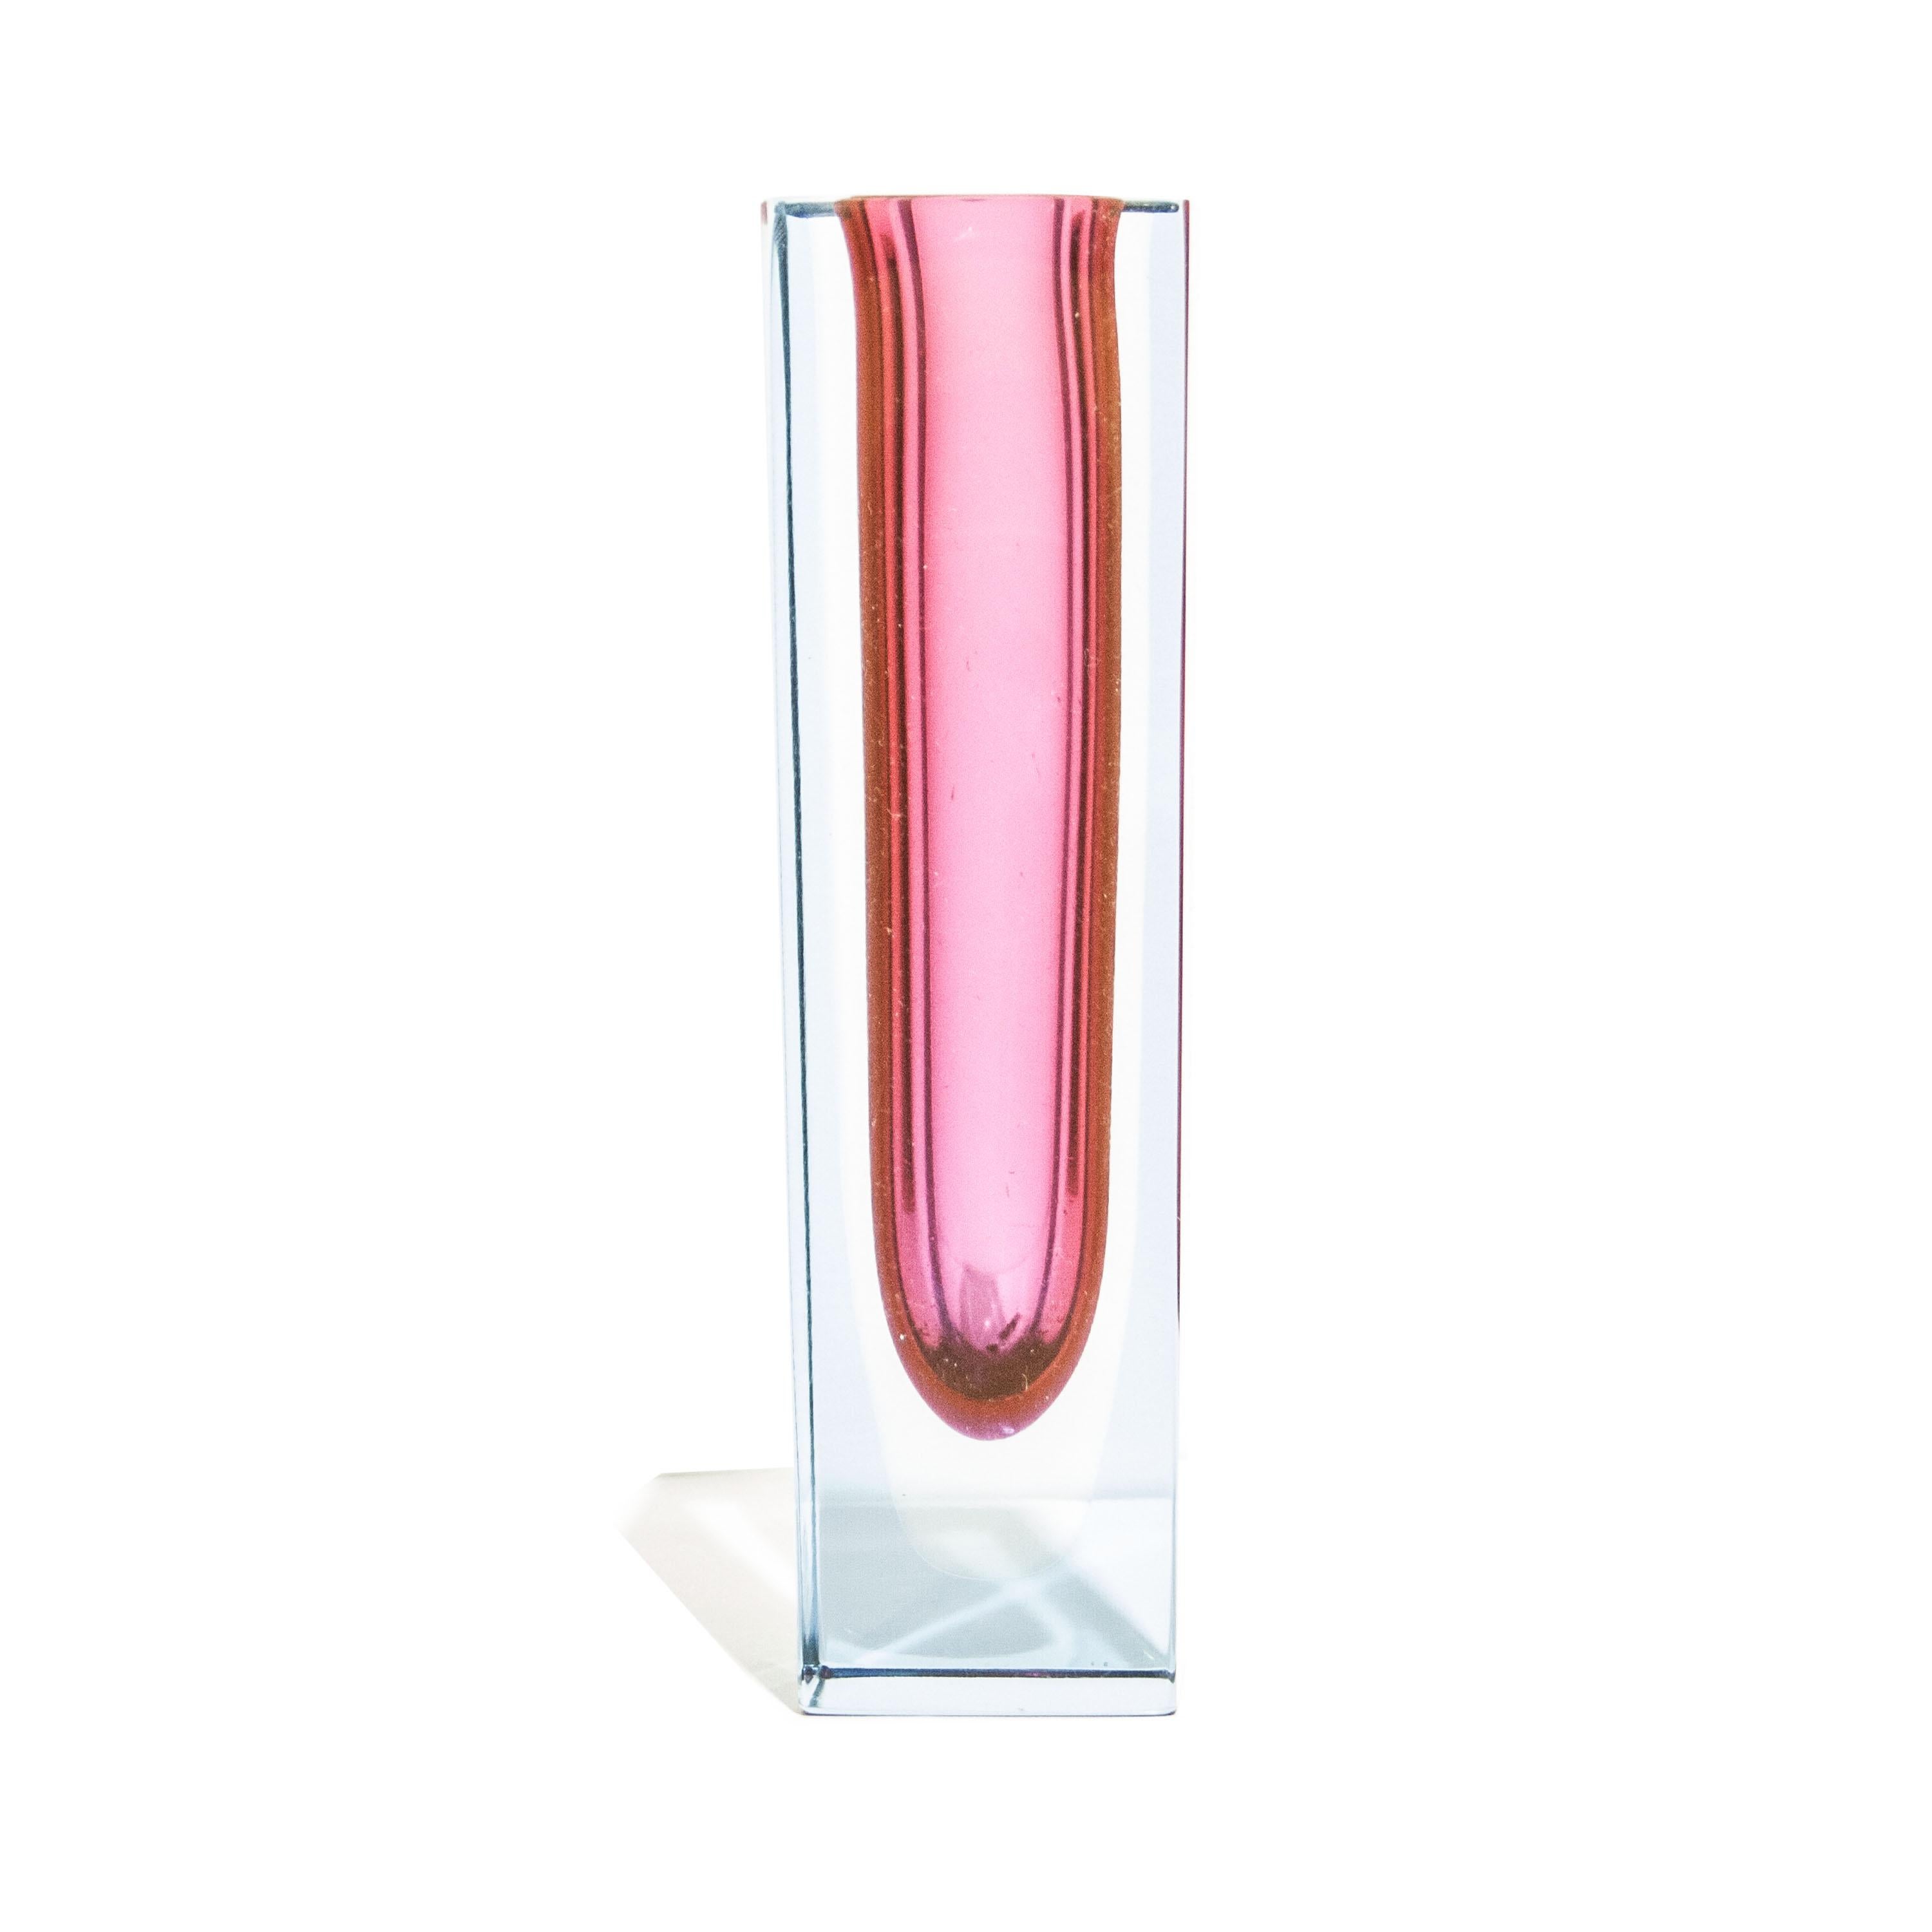 Italian small vase designed by Flavio Poli in the 1970´s. The vase is hand-crafted in faceted Murano glass in different colors with predominant pink.